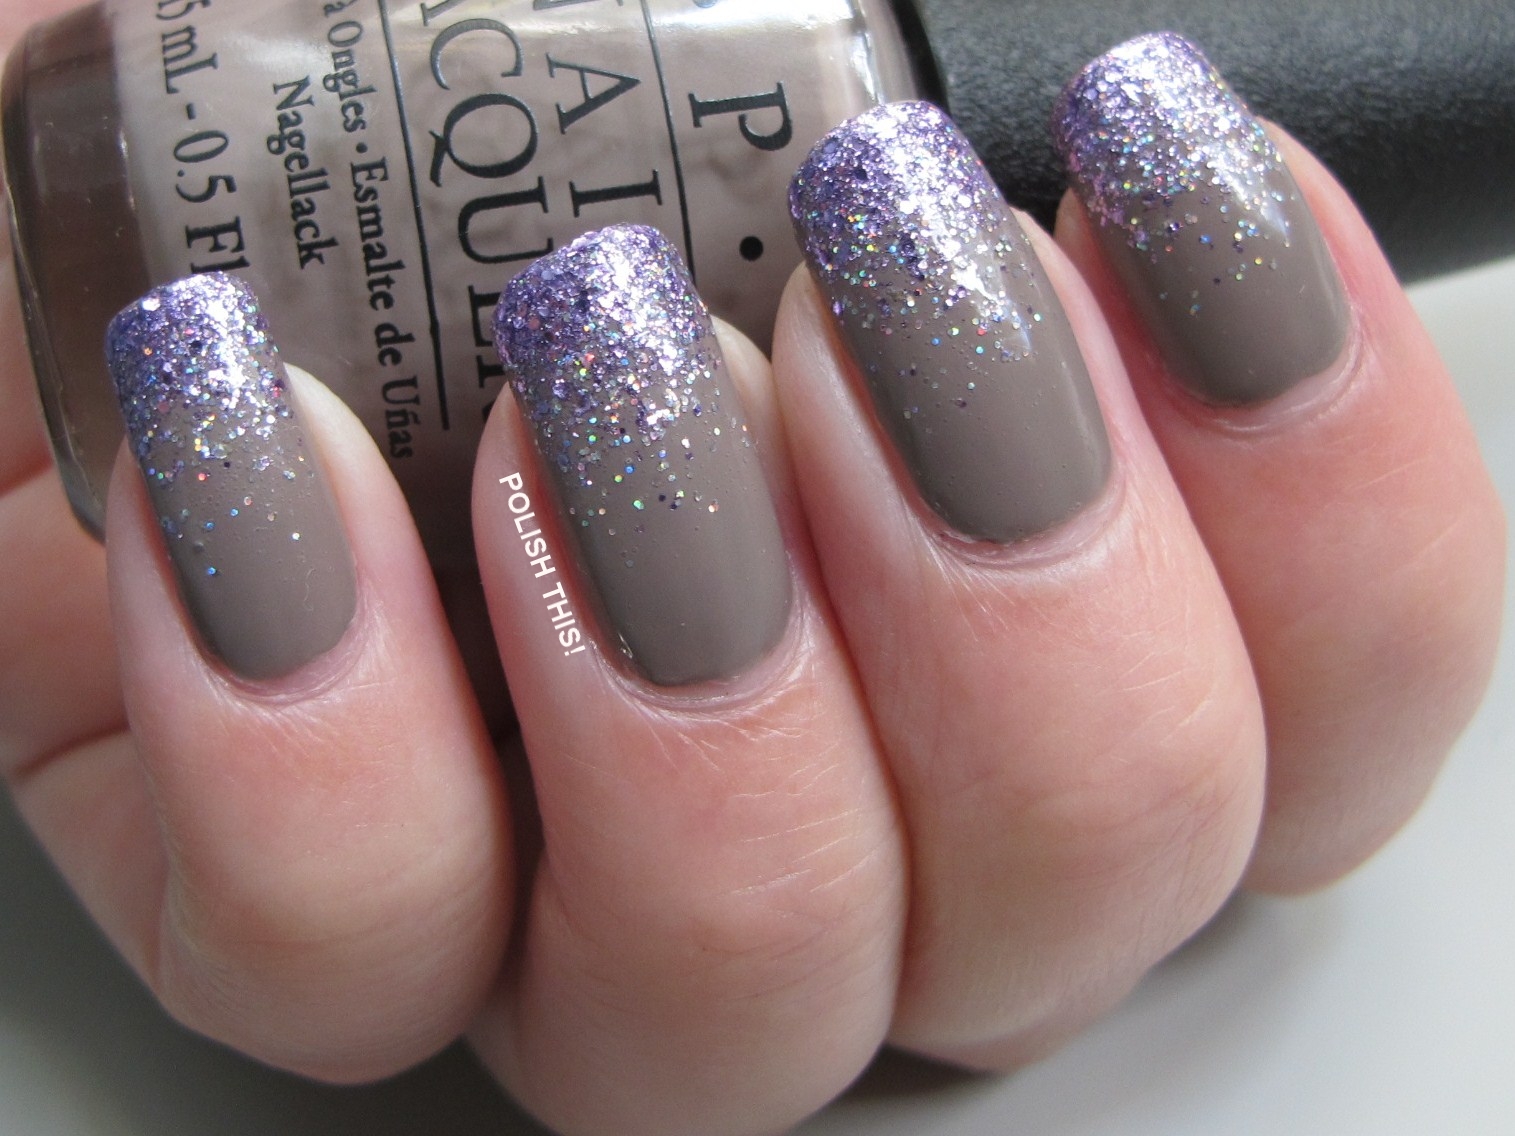 OPI Nail Lacquer, Berlin There Done That - wide 1